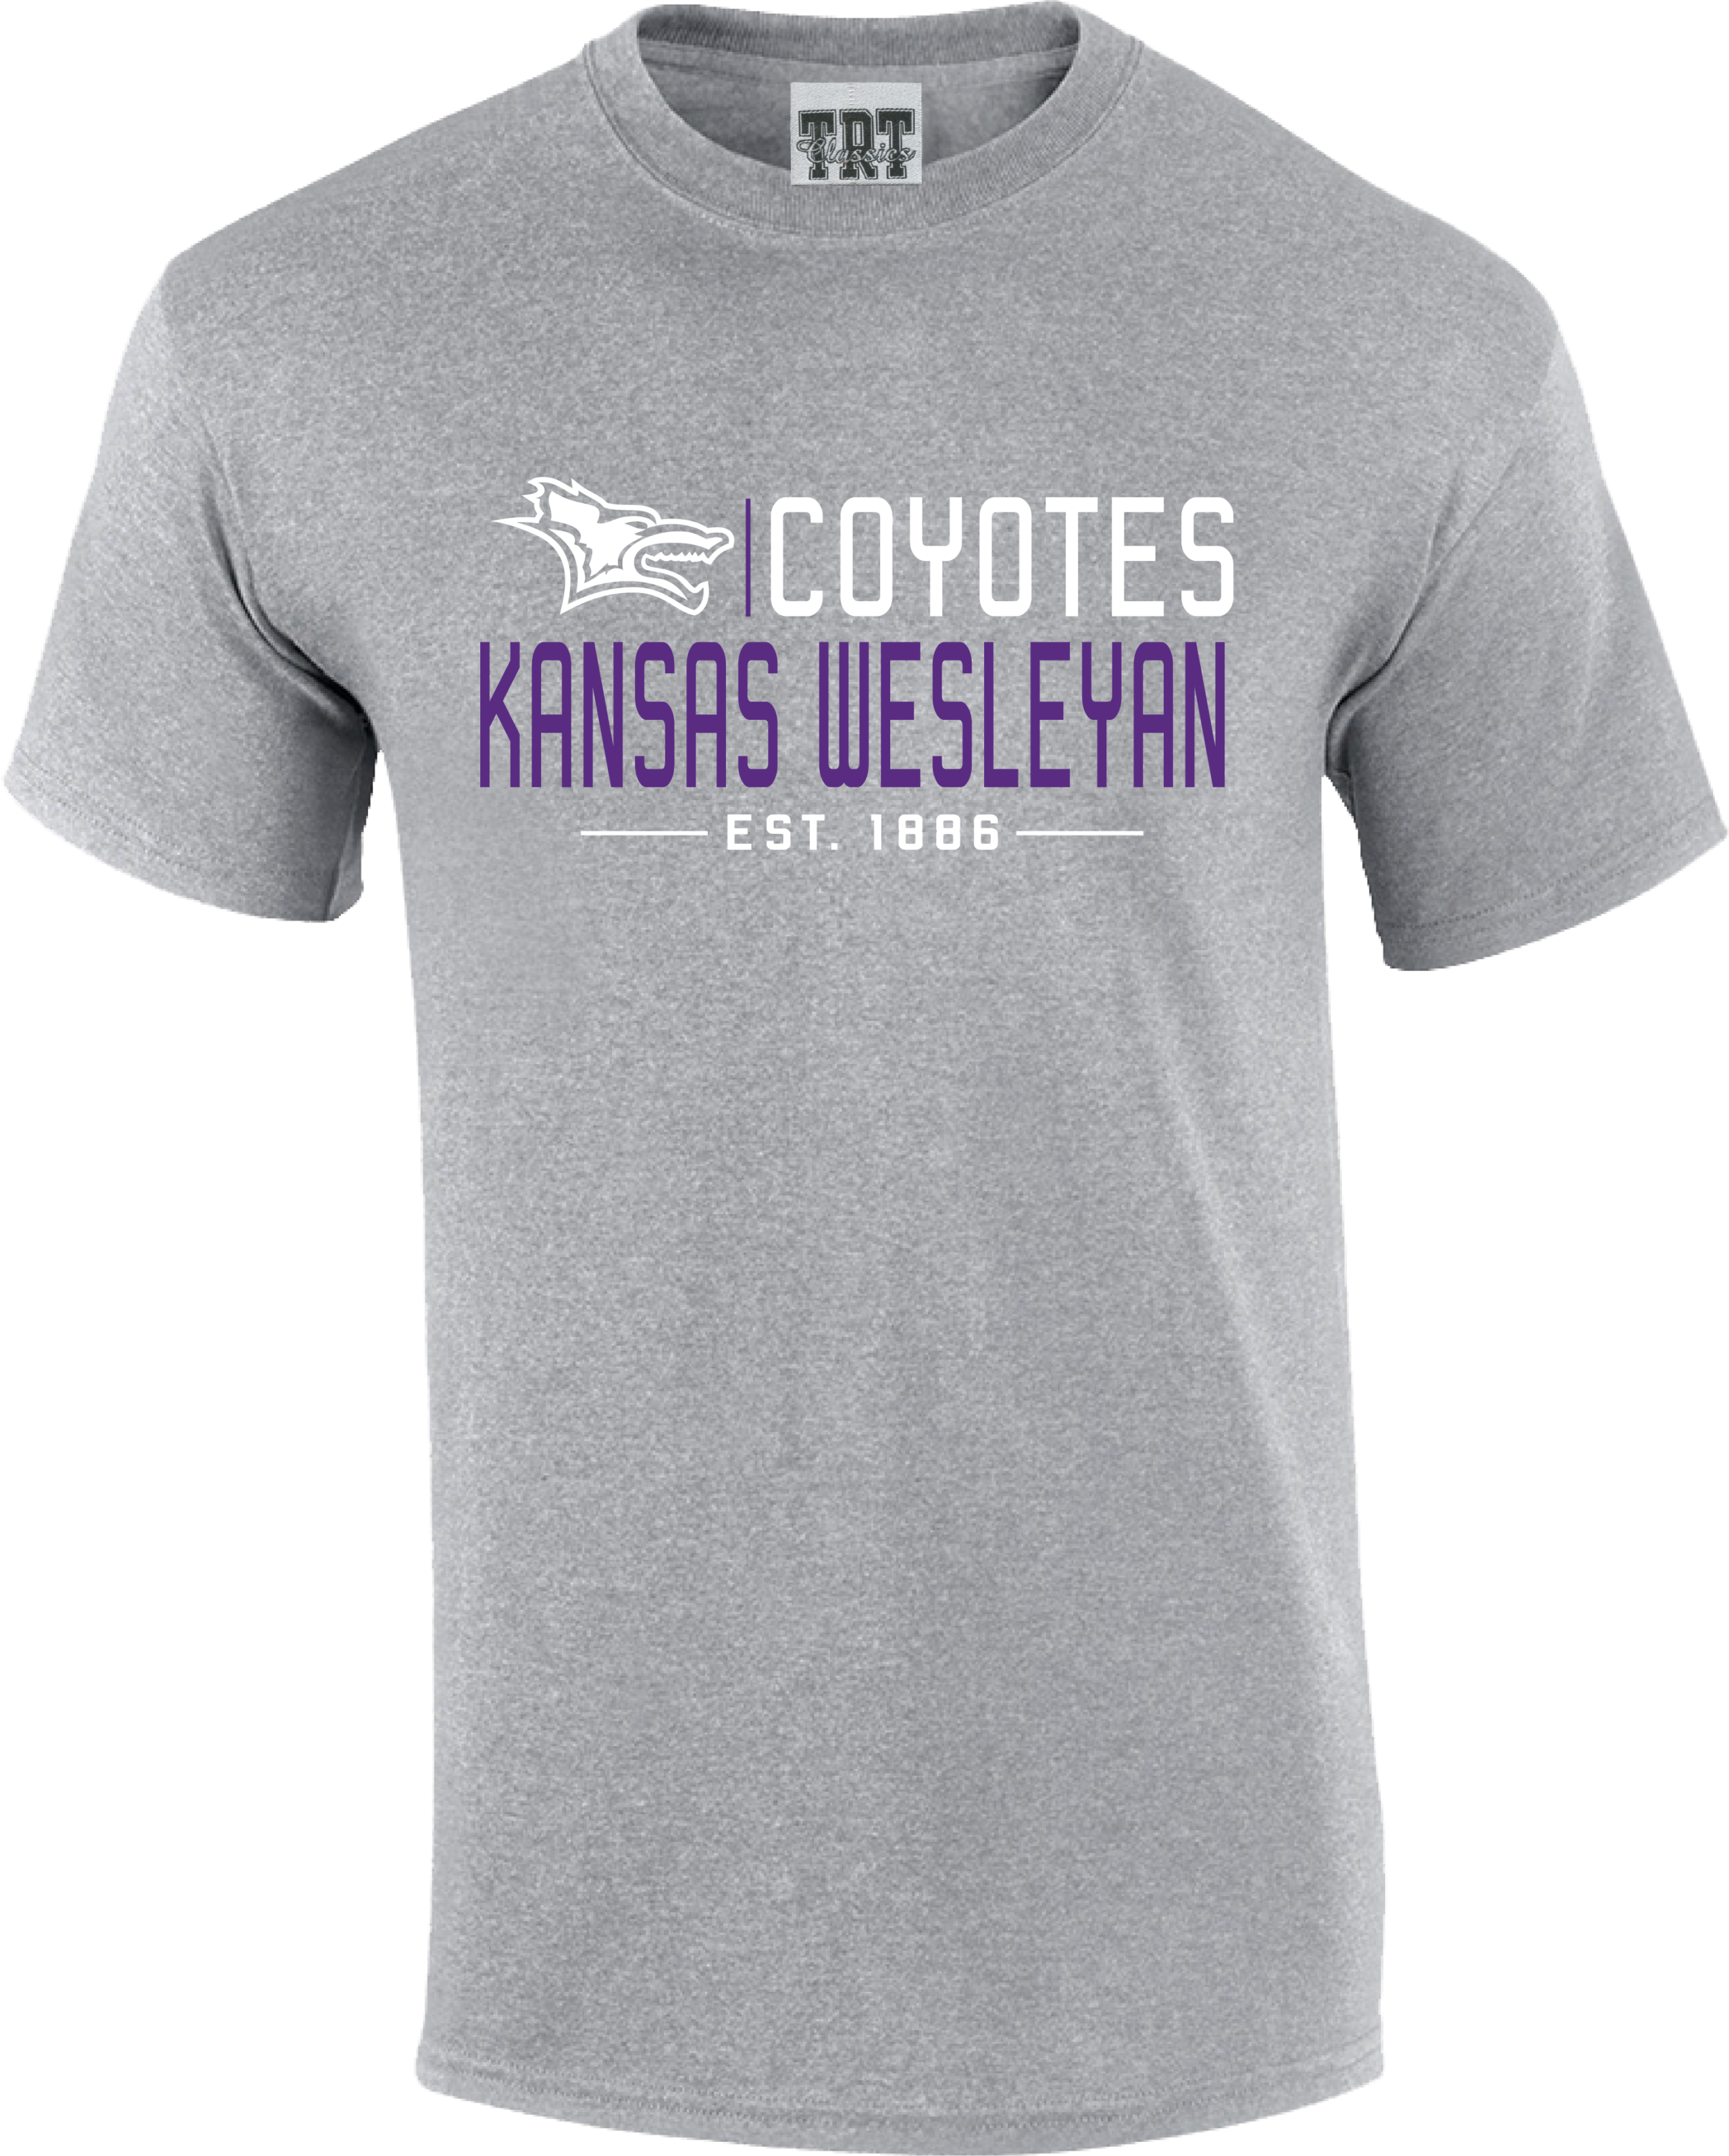 TRT Coyotes Cotton SS